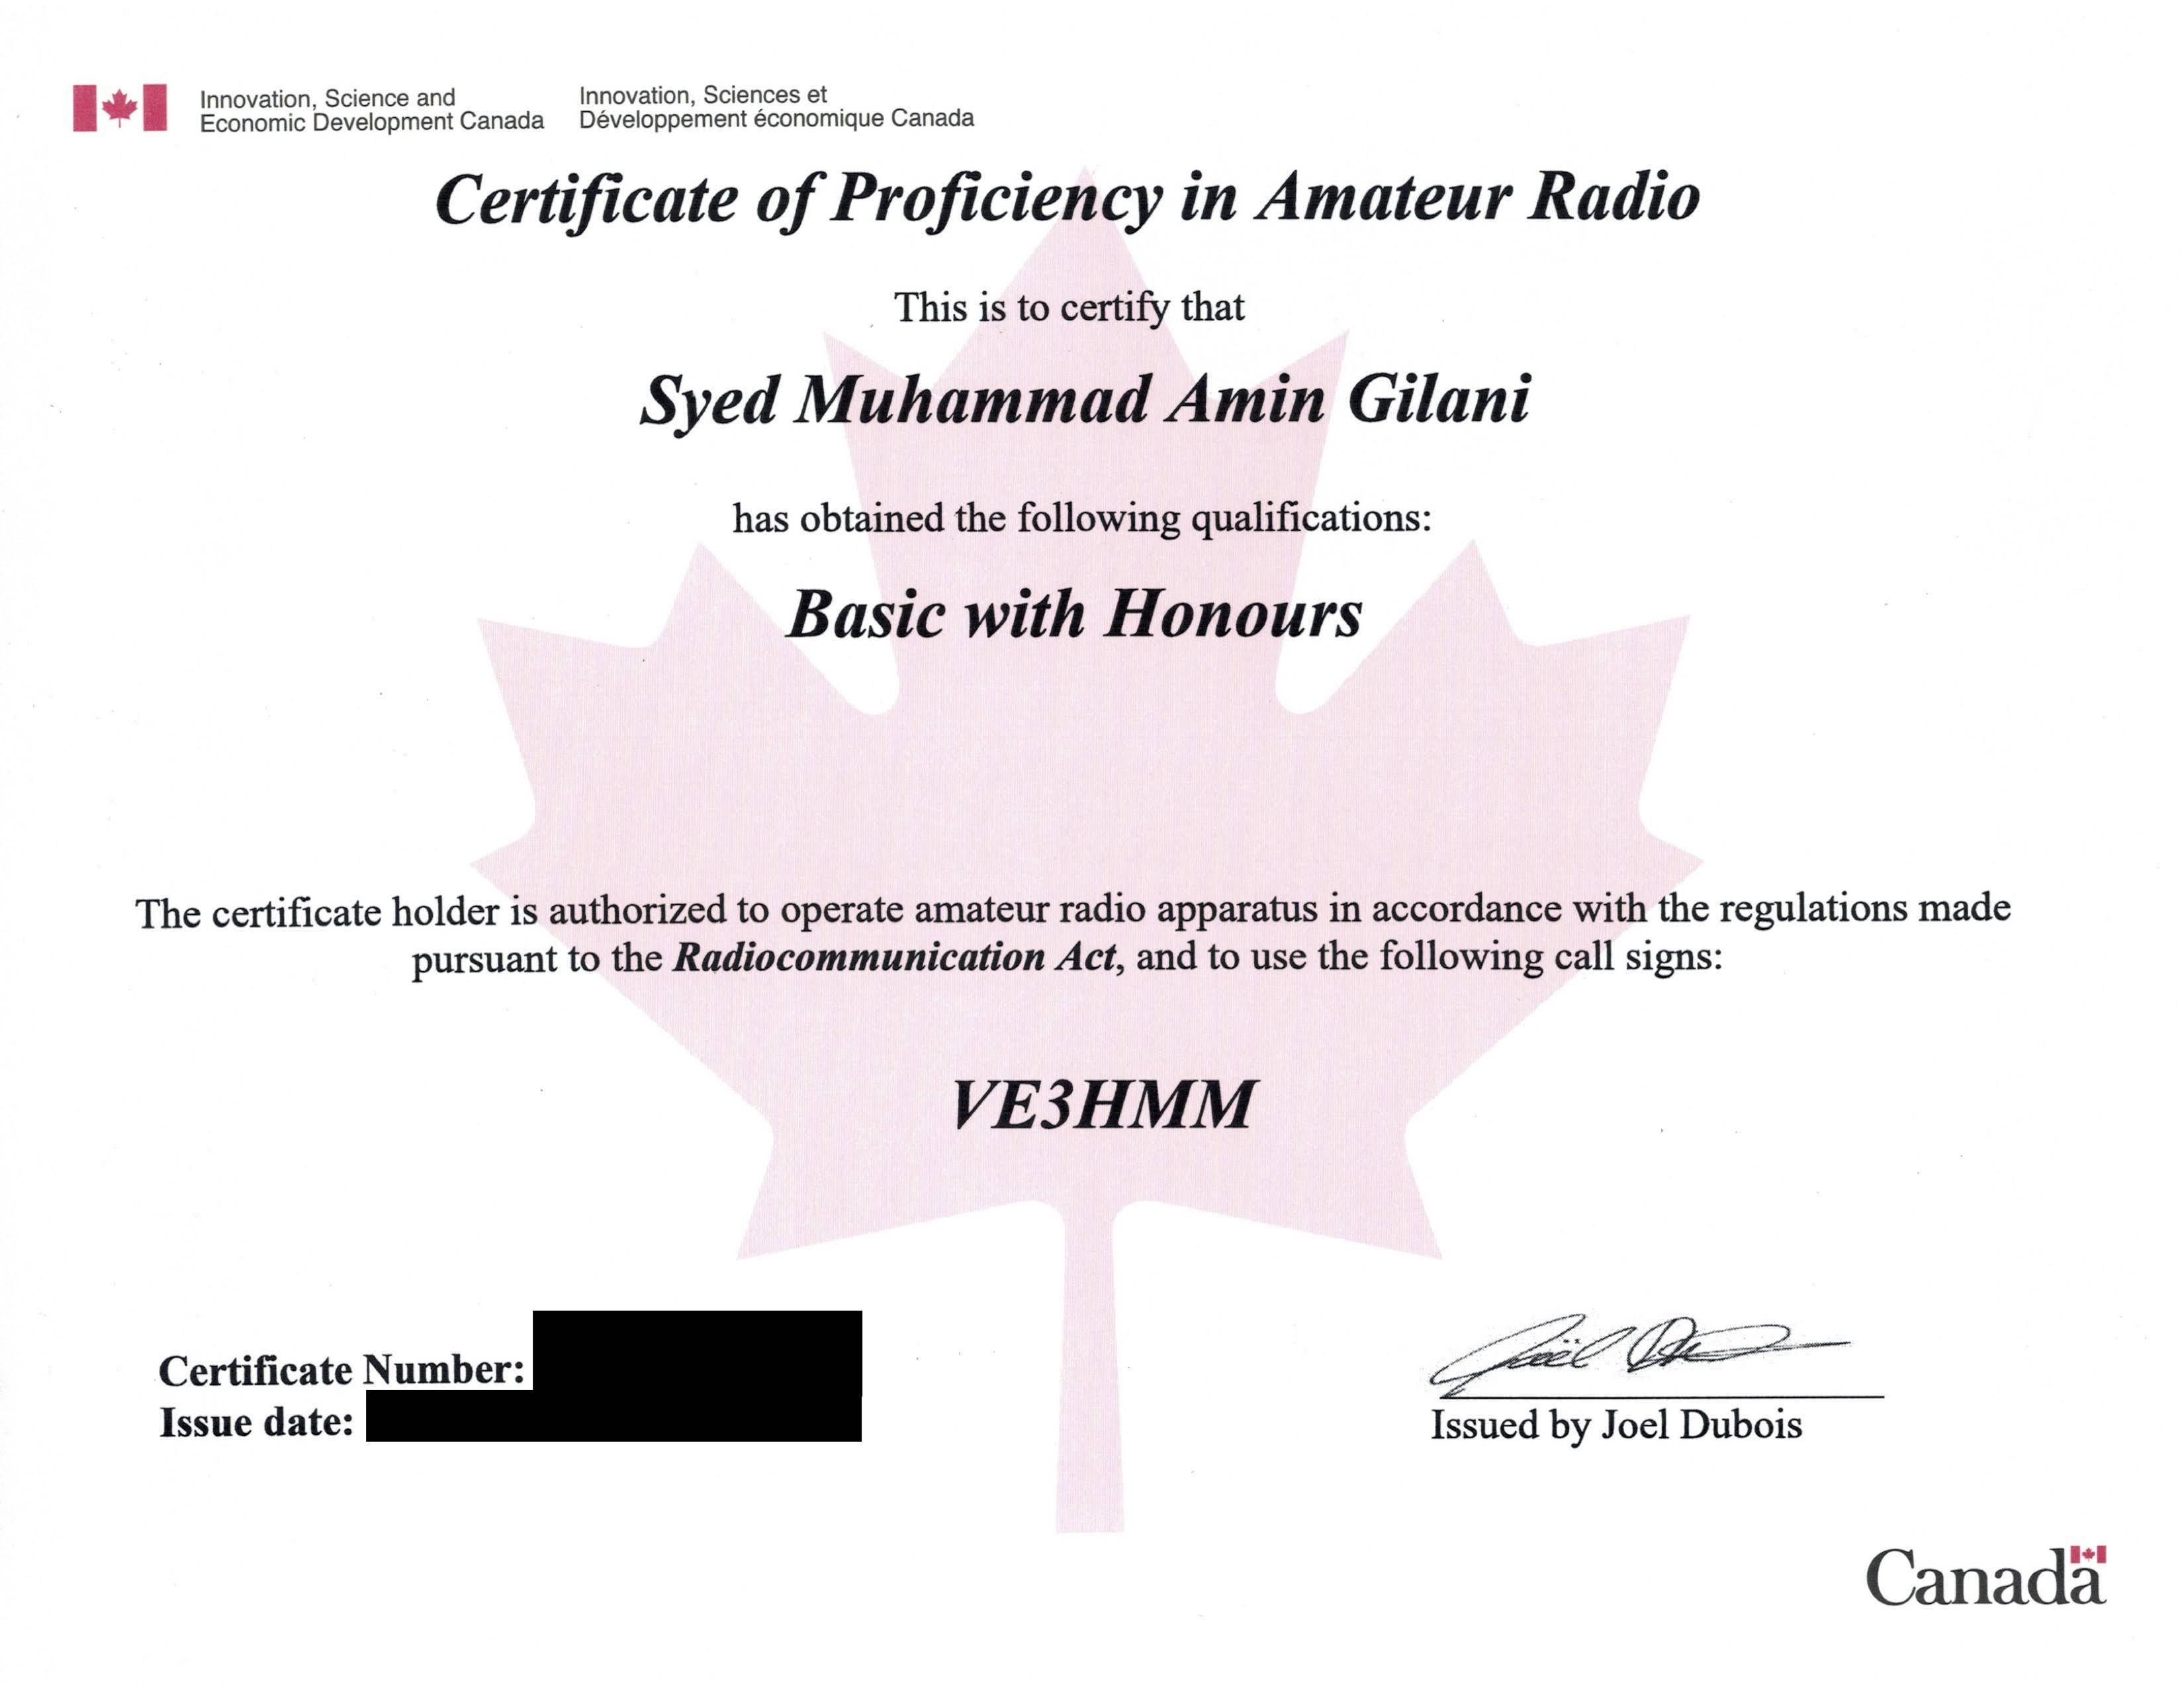 The full-sized amateur radio certifcate